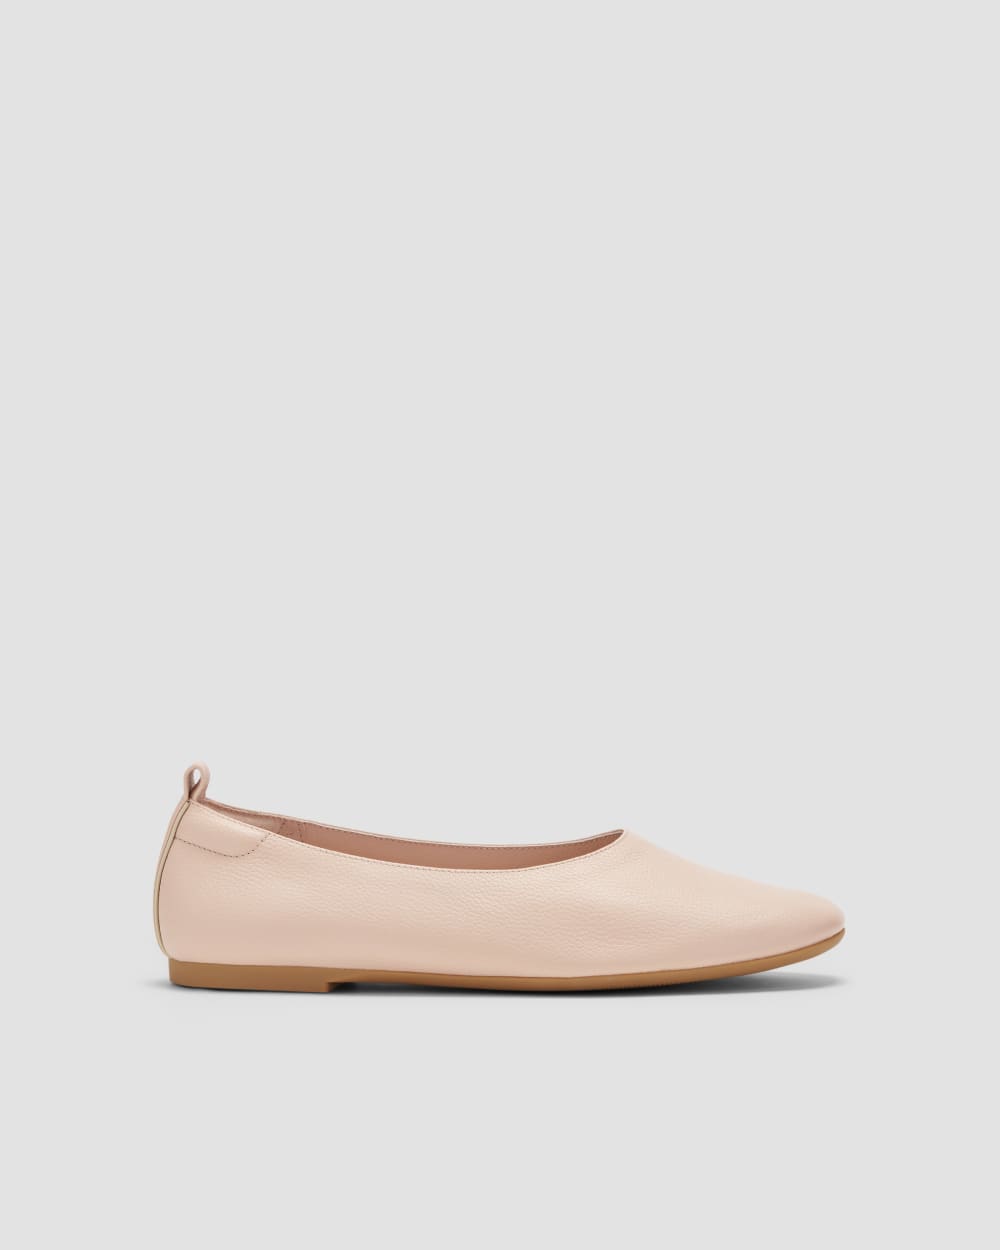 New Everlane Day Glove Italian Leather Ballet Flat Shoes in Birch Size 9